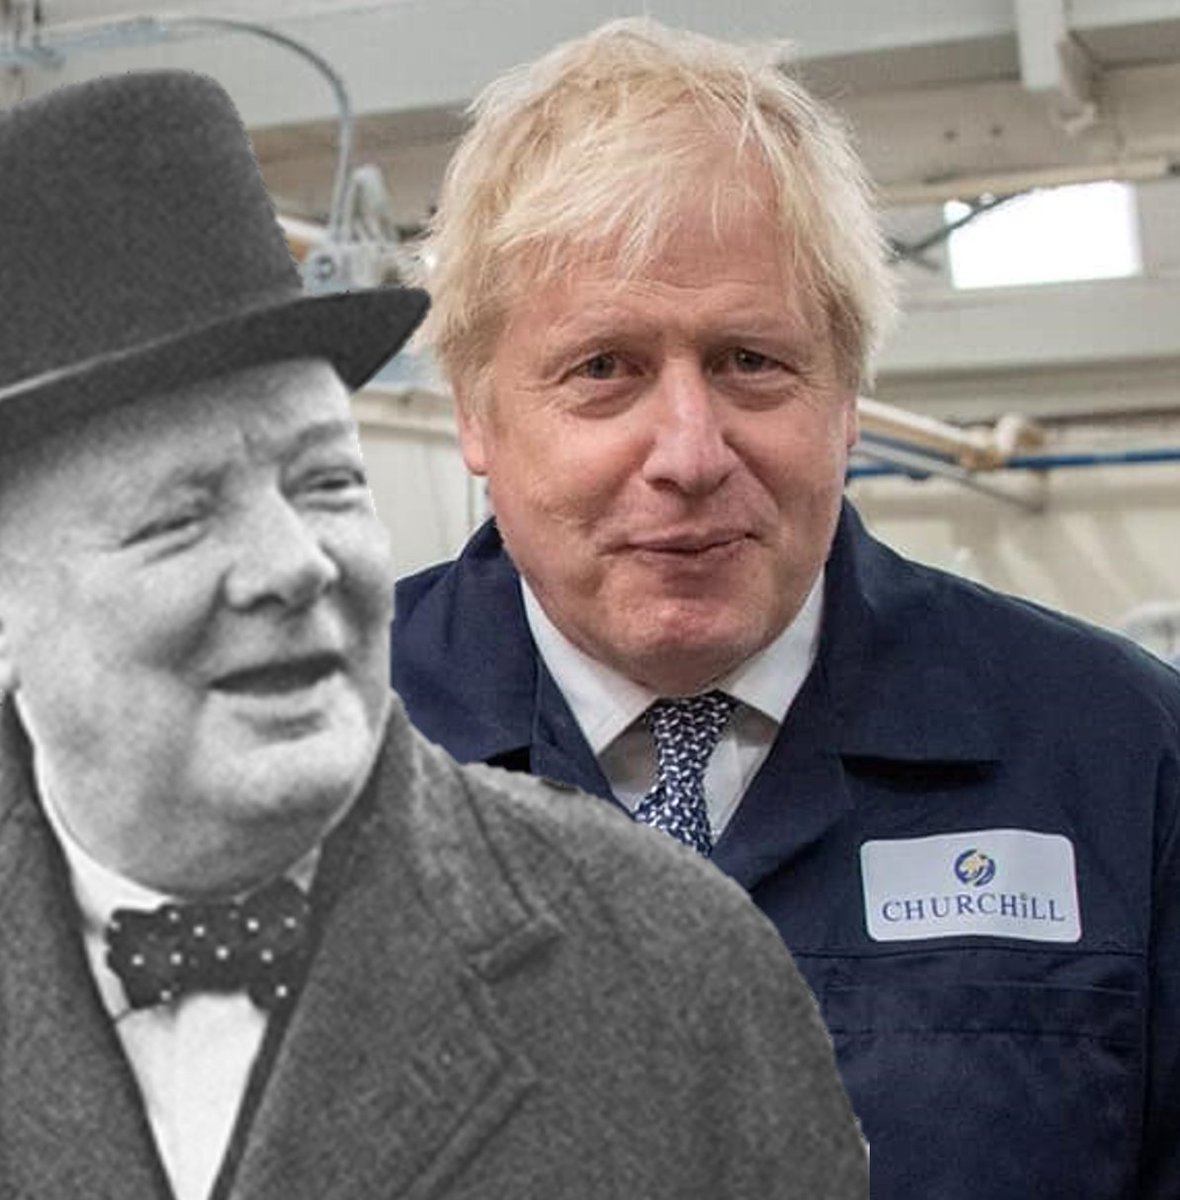 We all know what Johnson was thinking when he visited Churchill Pottery in Stoke. 
... and whatever you think of Churchill, he never ran away.
#ToriesOut339 #JohnsonTheLiar #JohnsonRanAway #JohnsonTheCorruptPM #JohnsontheCoward